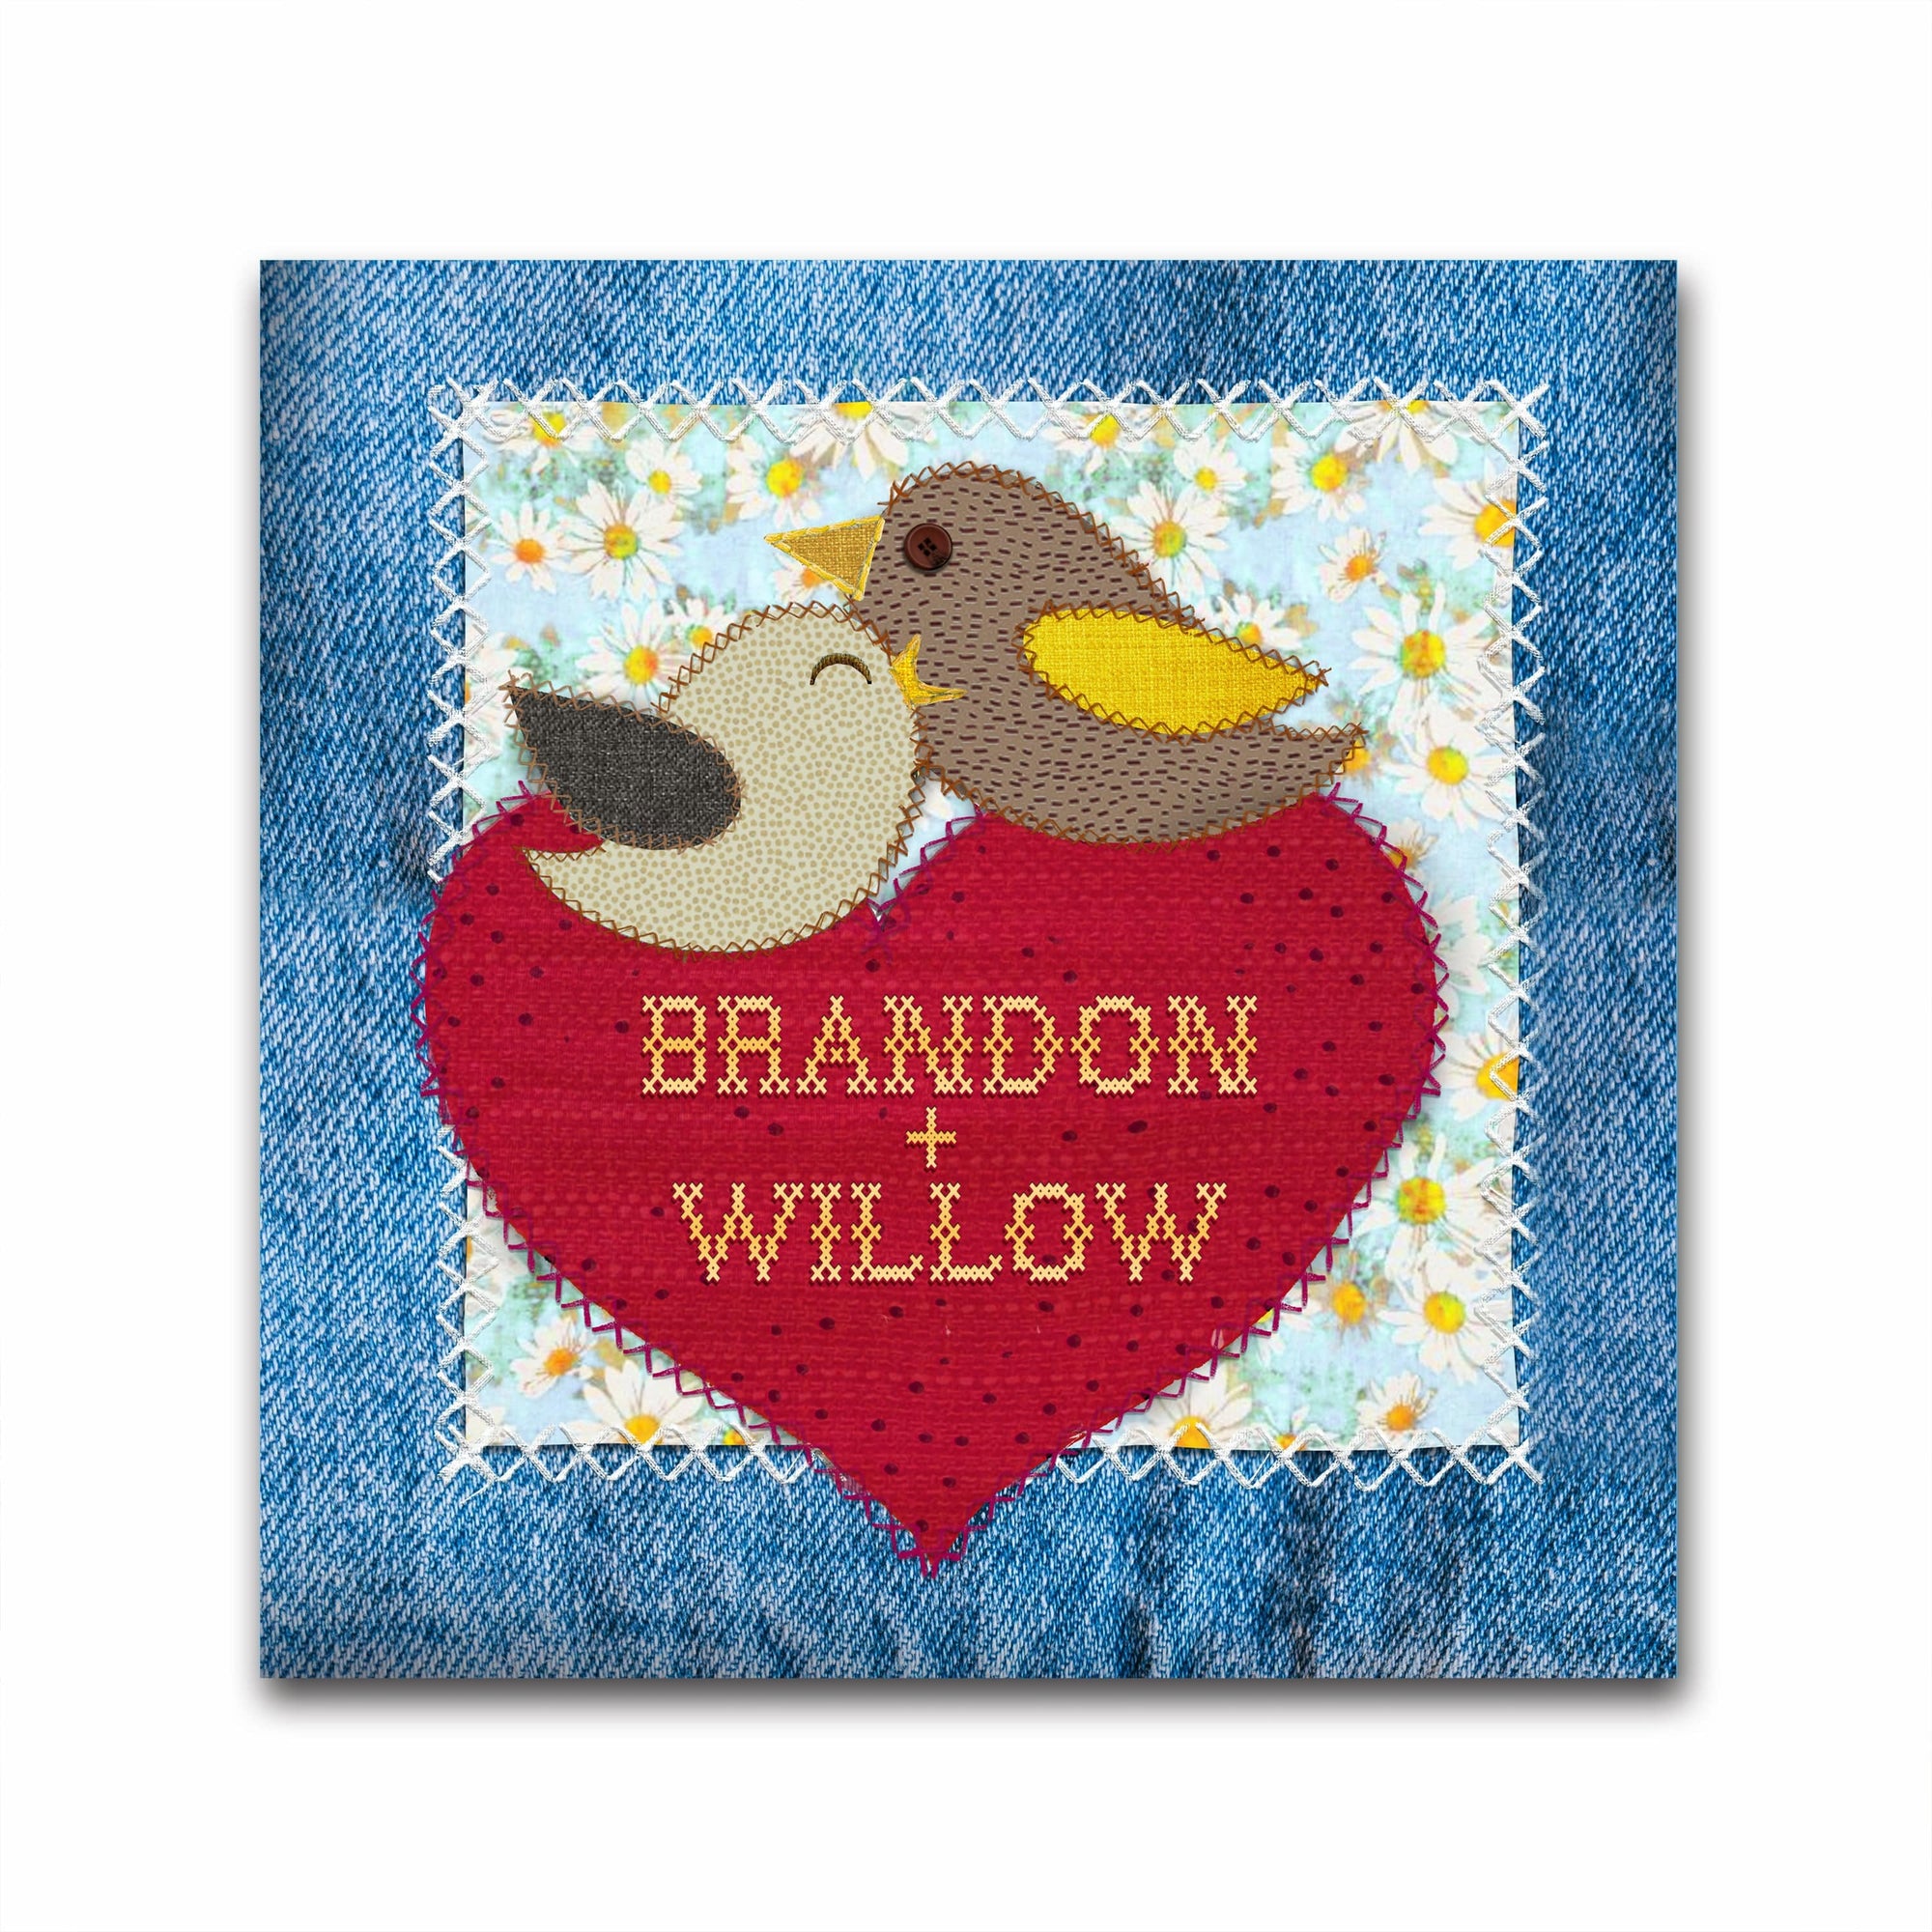 Stitched Together - Romantic cross stitch style art - personalized romantic gifts from Personal Prints